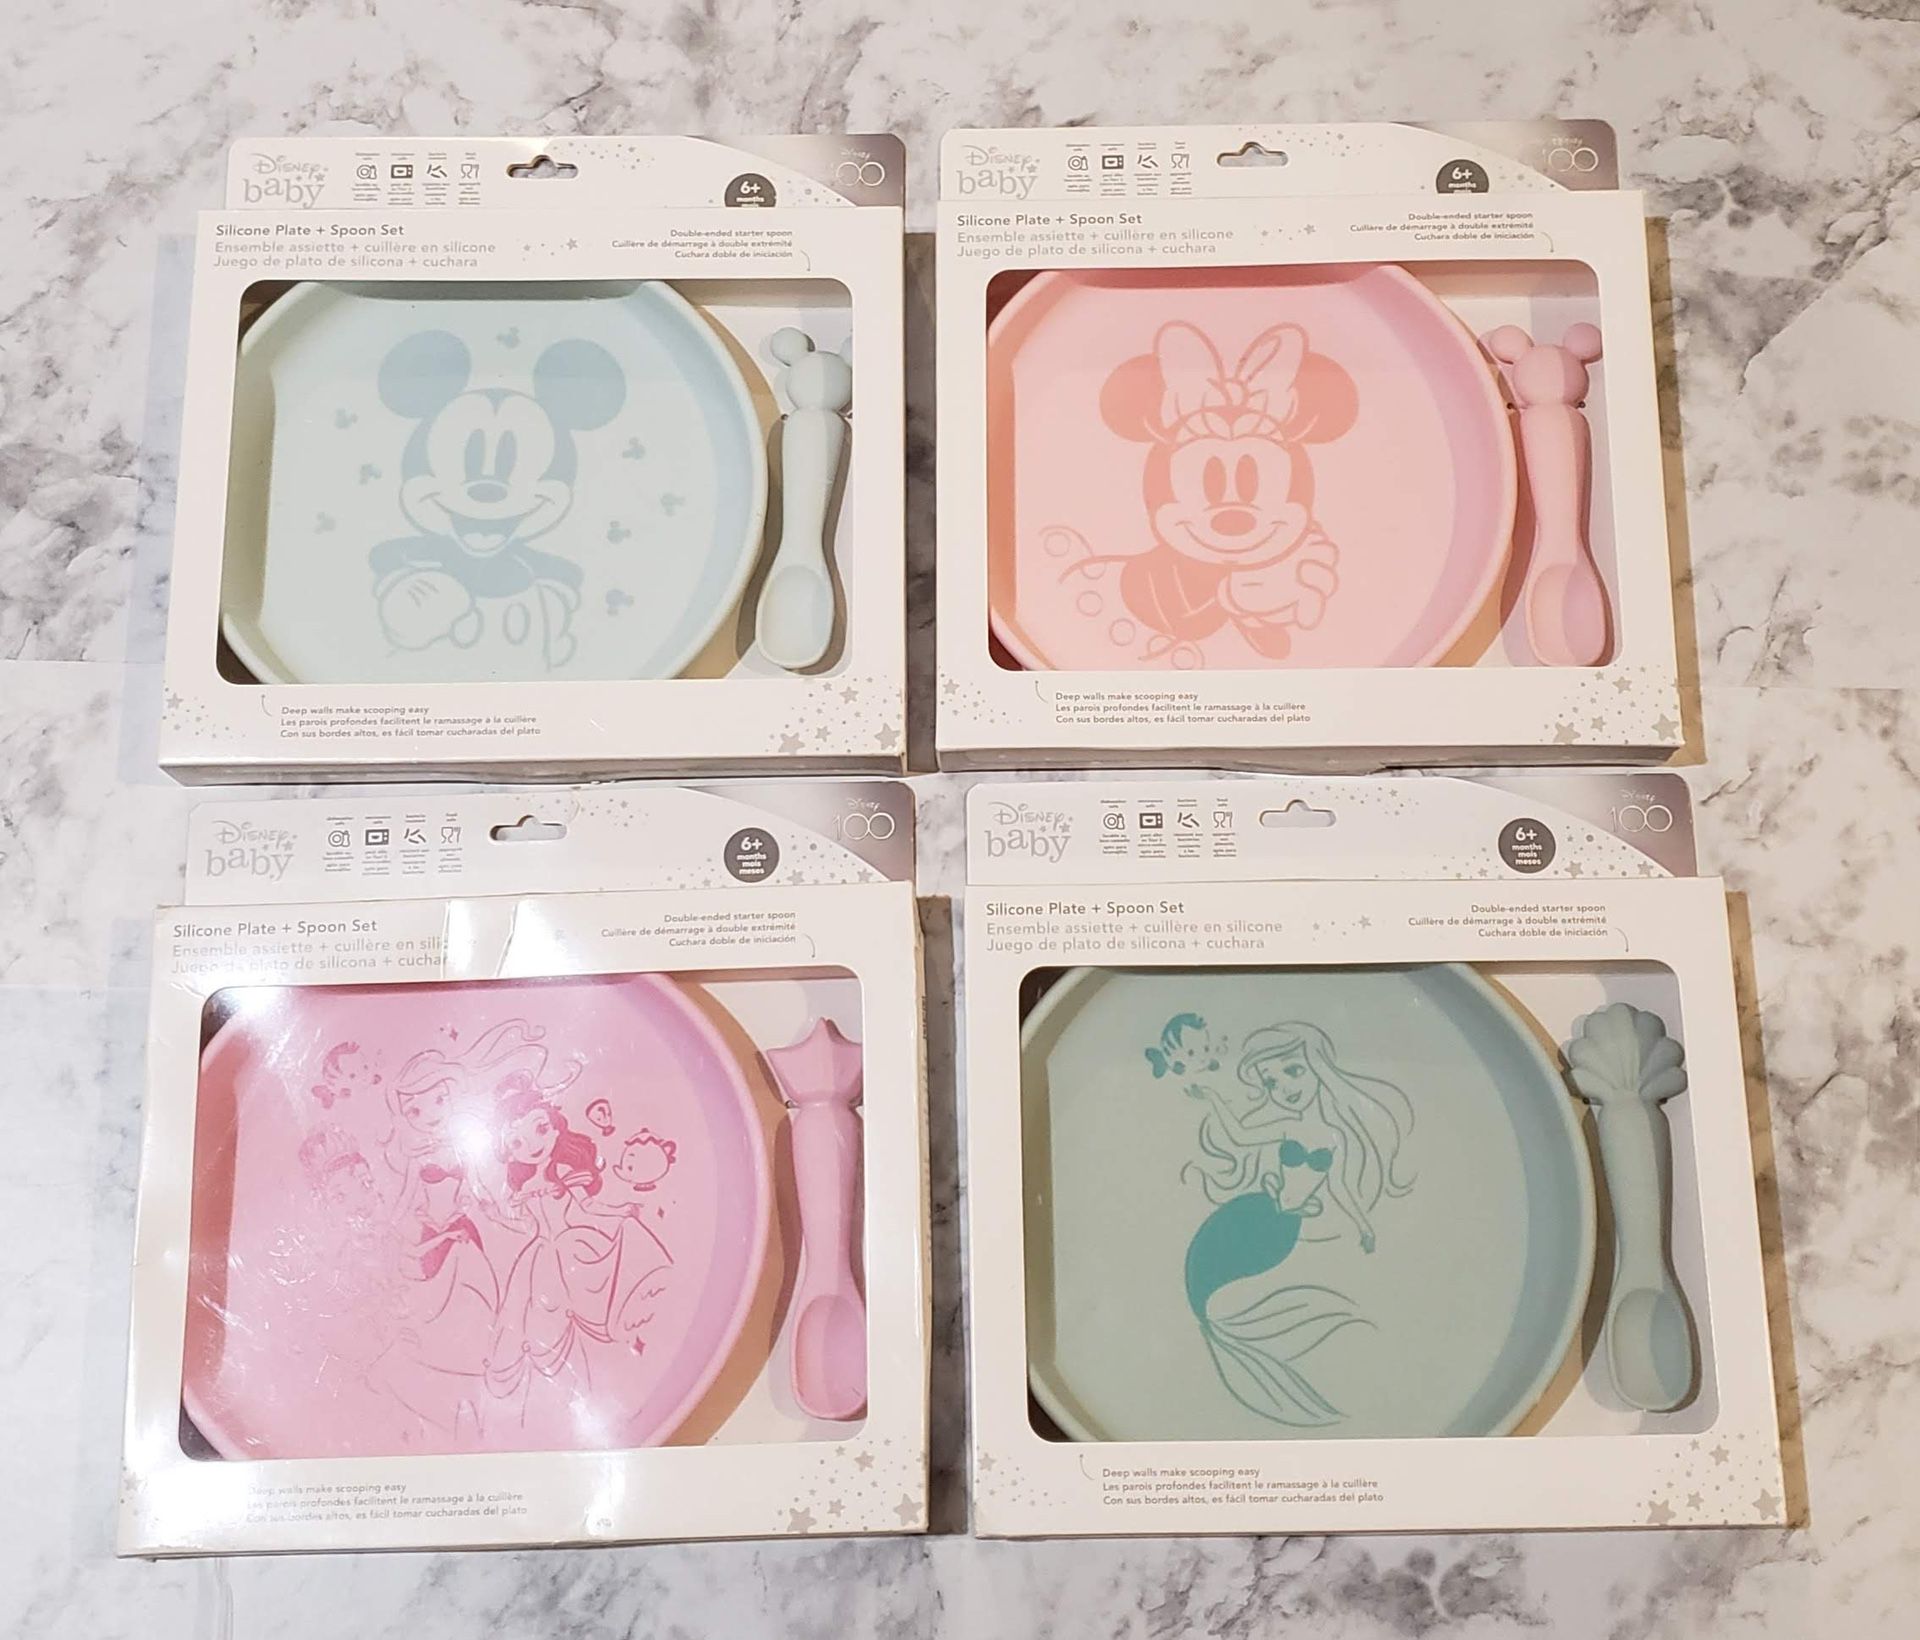 Disney Baby Silicone Plate & Spoon Set Lot Of 4 